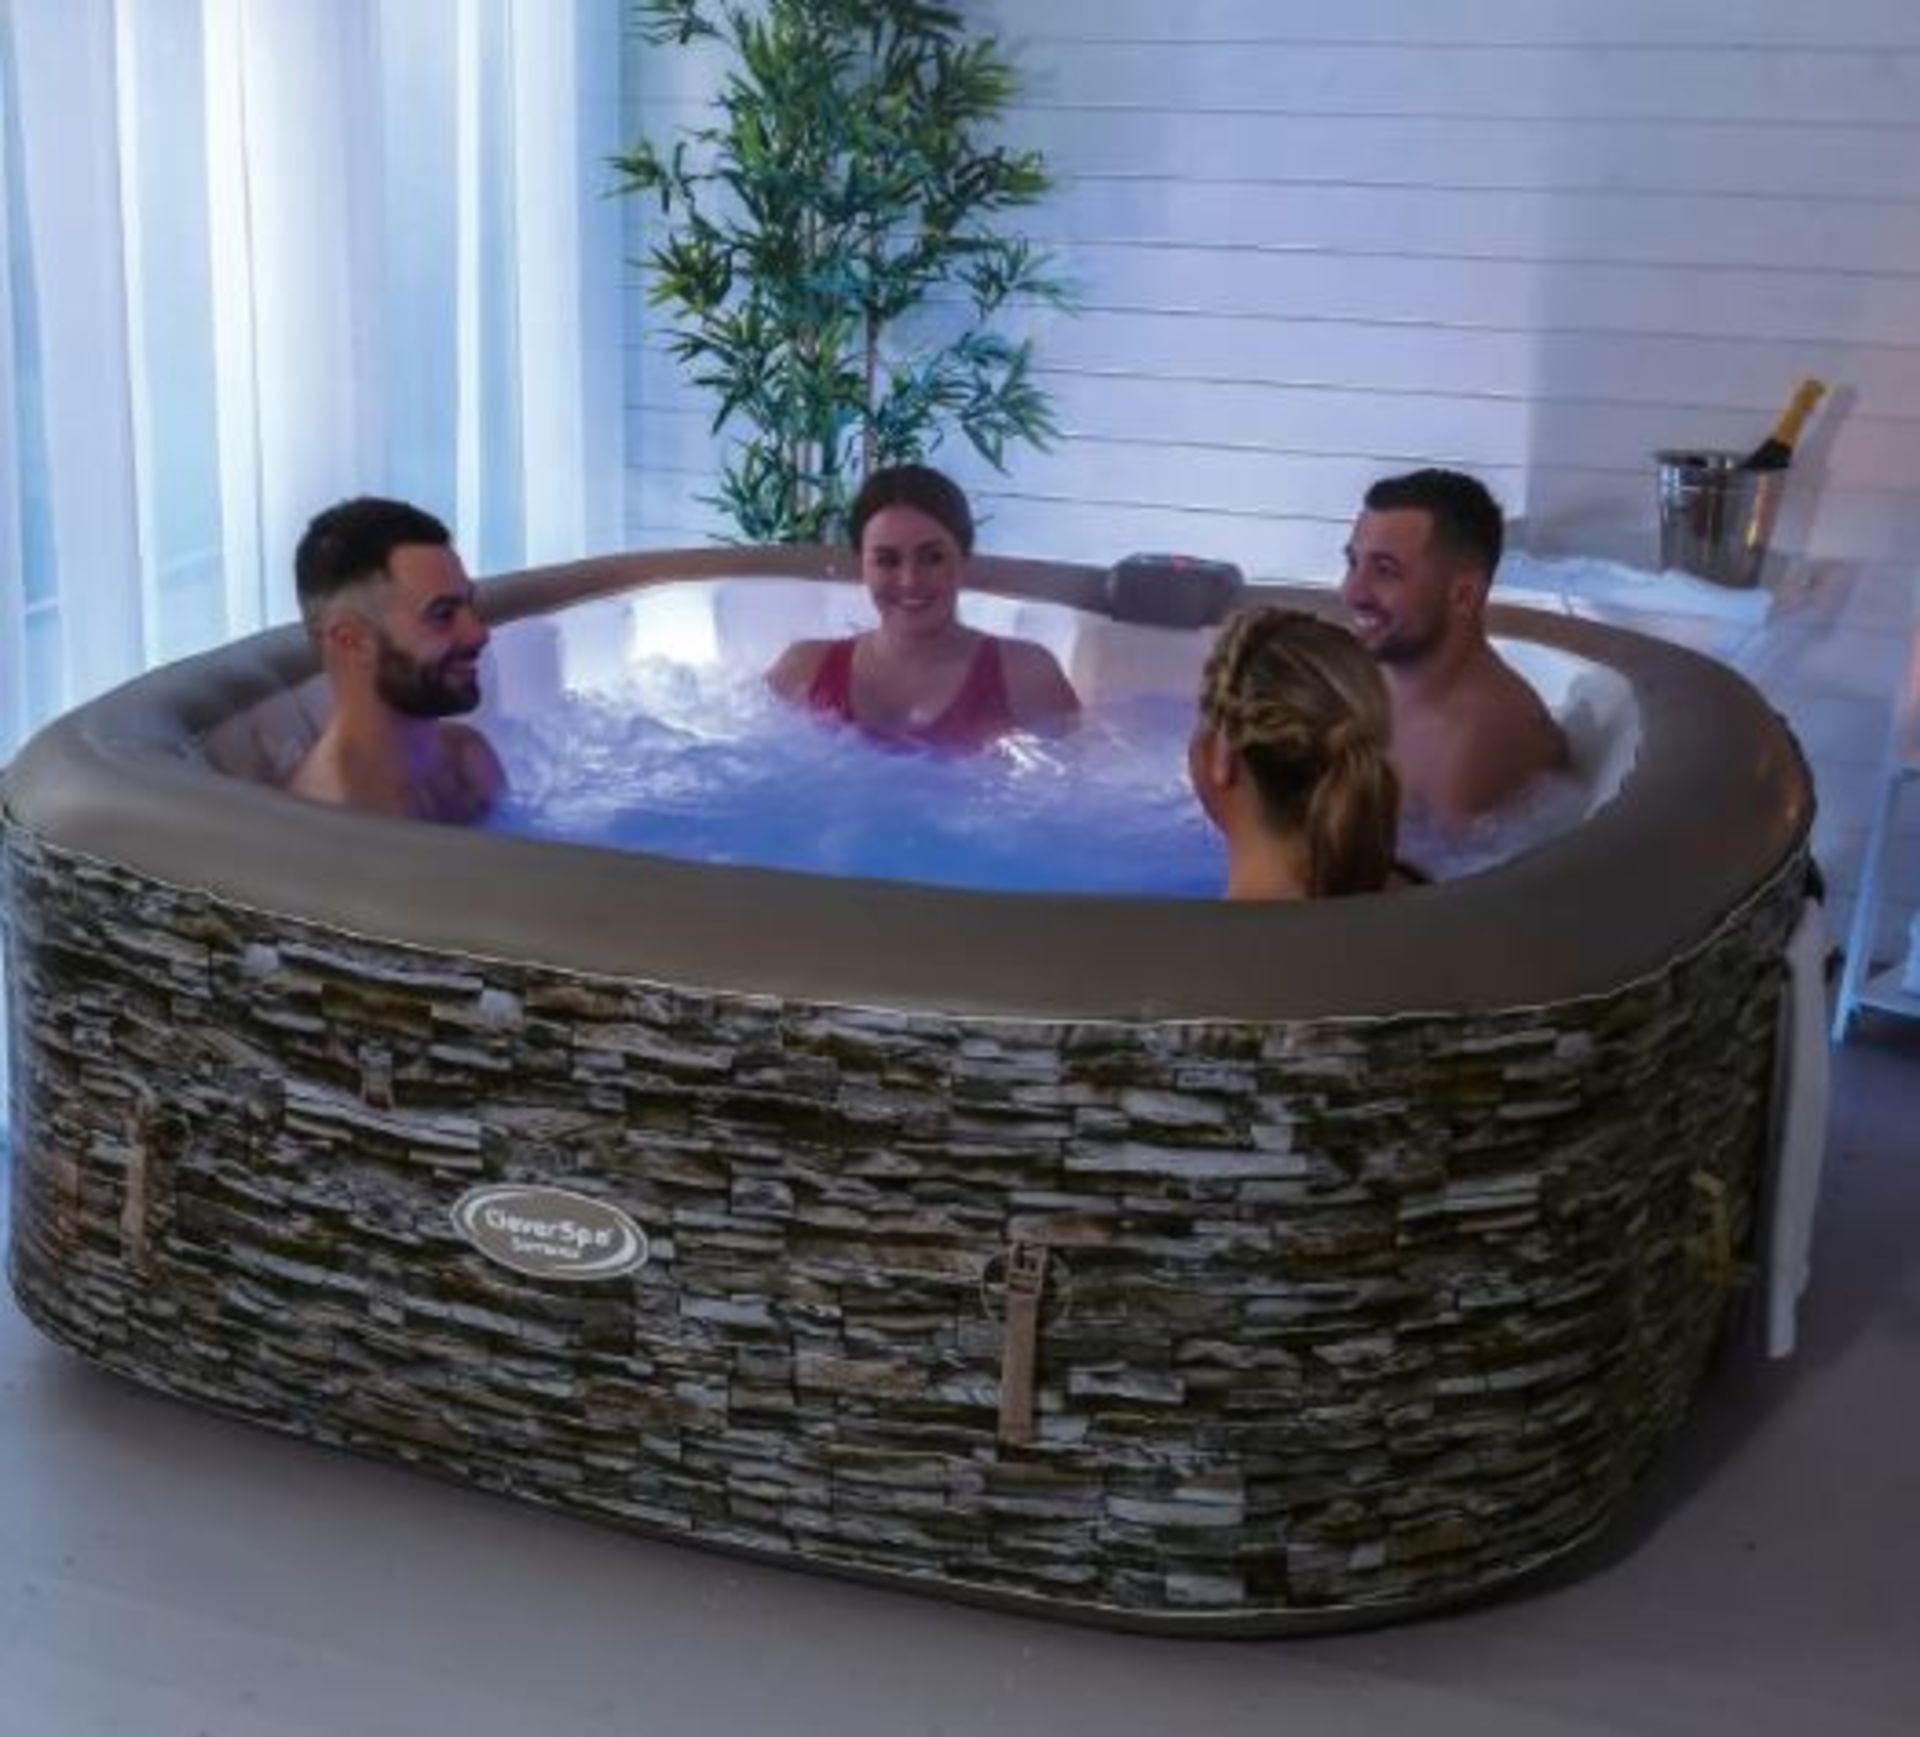 (R7C) 1x Cleverspa Sorrento 6 Person Hot Tub RRP £600. - Image 2 of 5